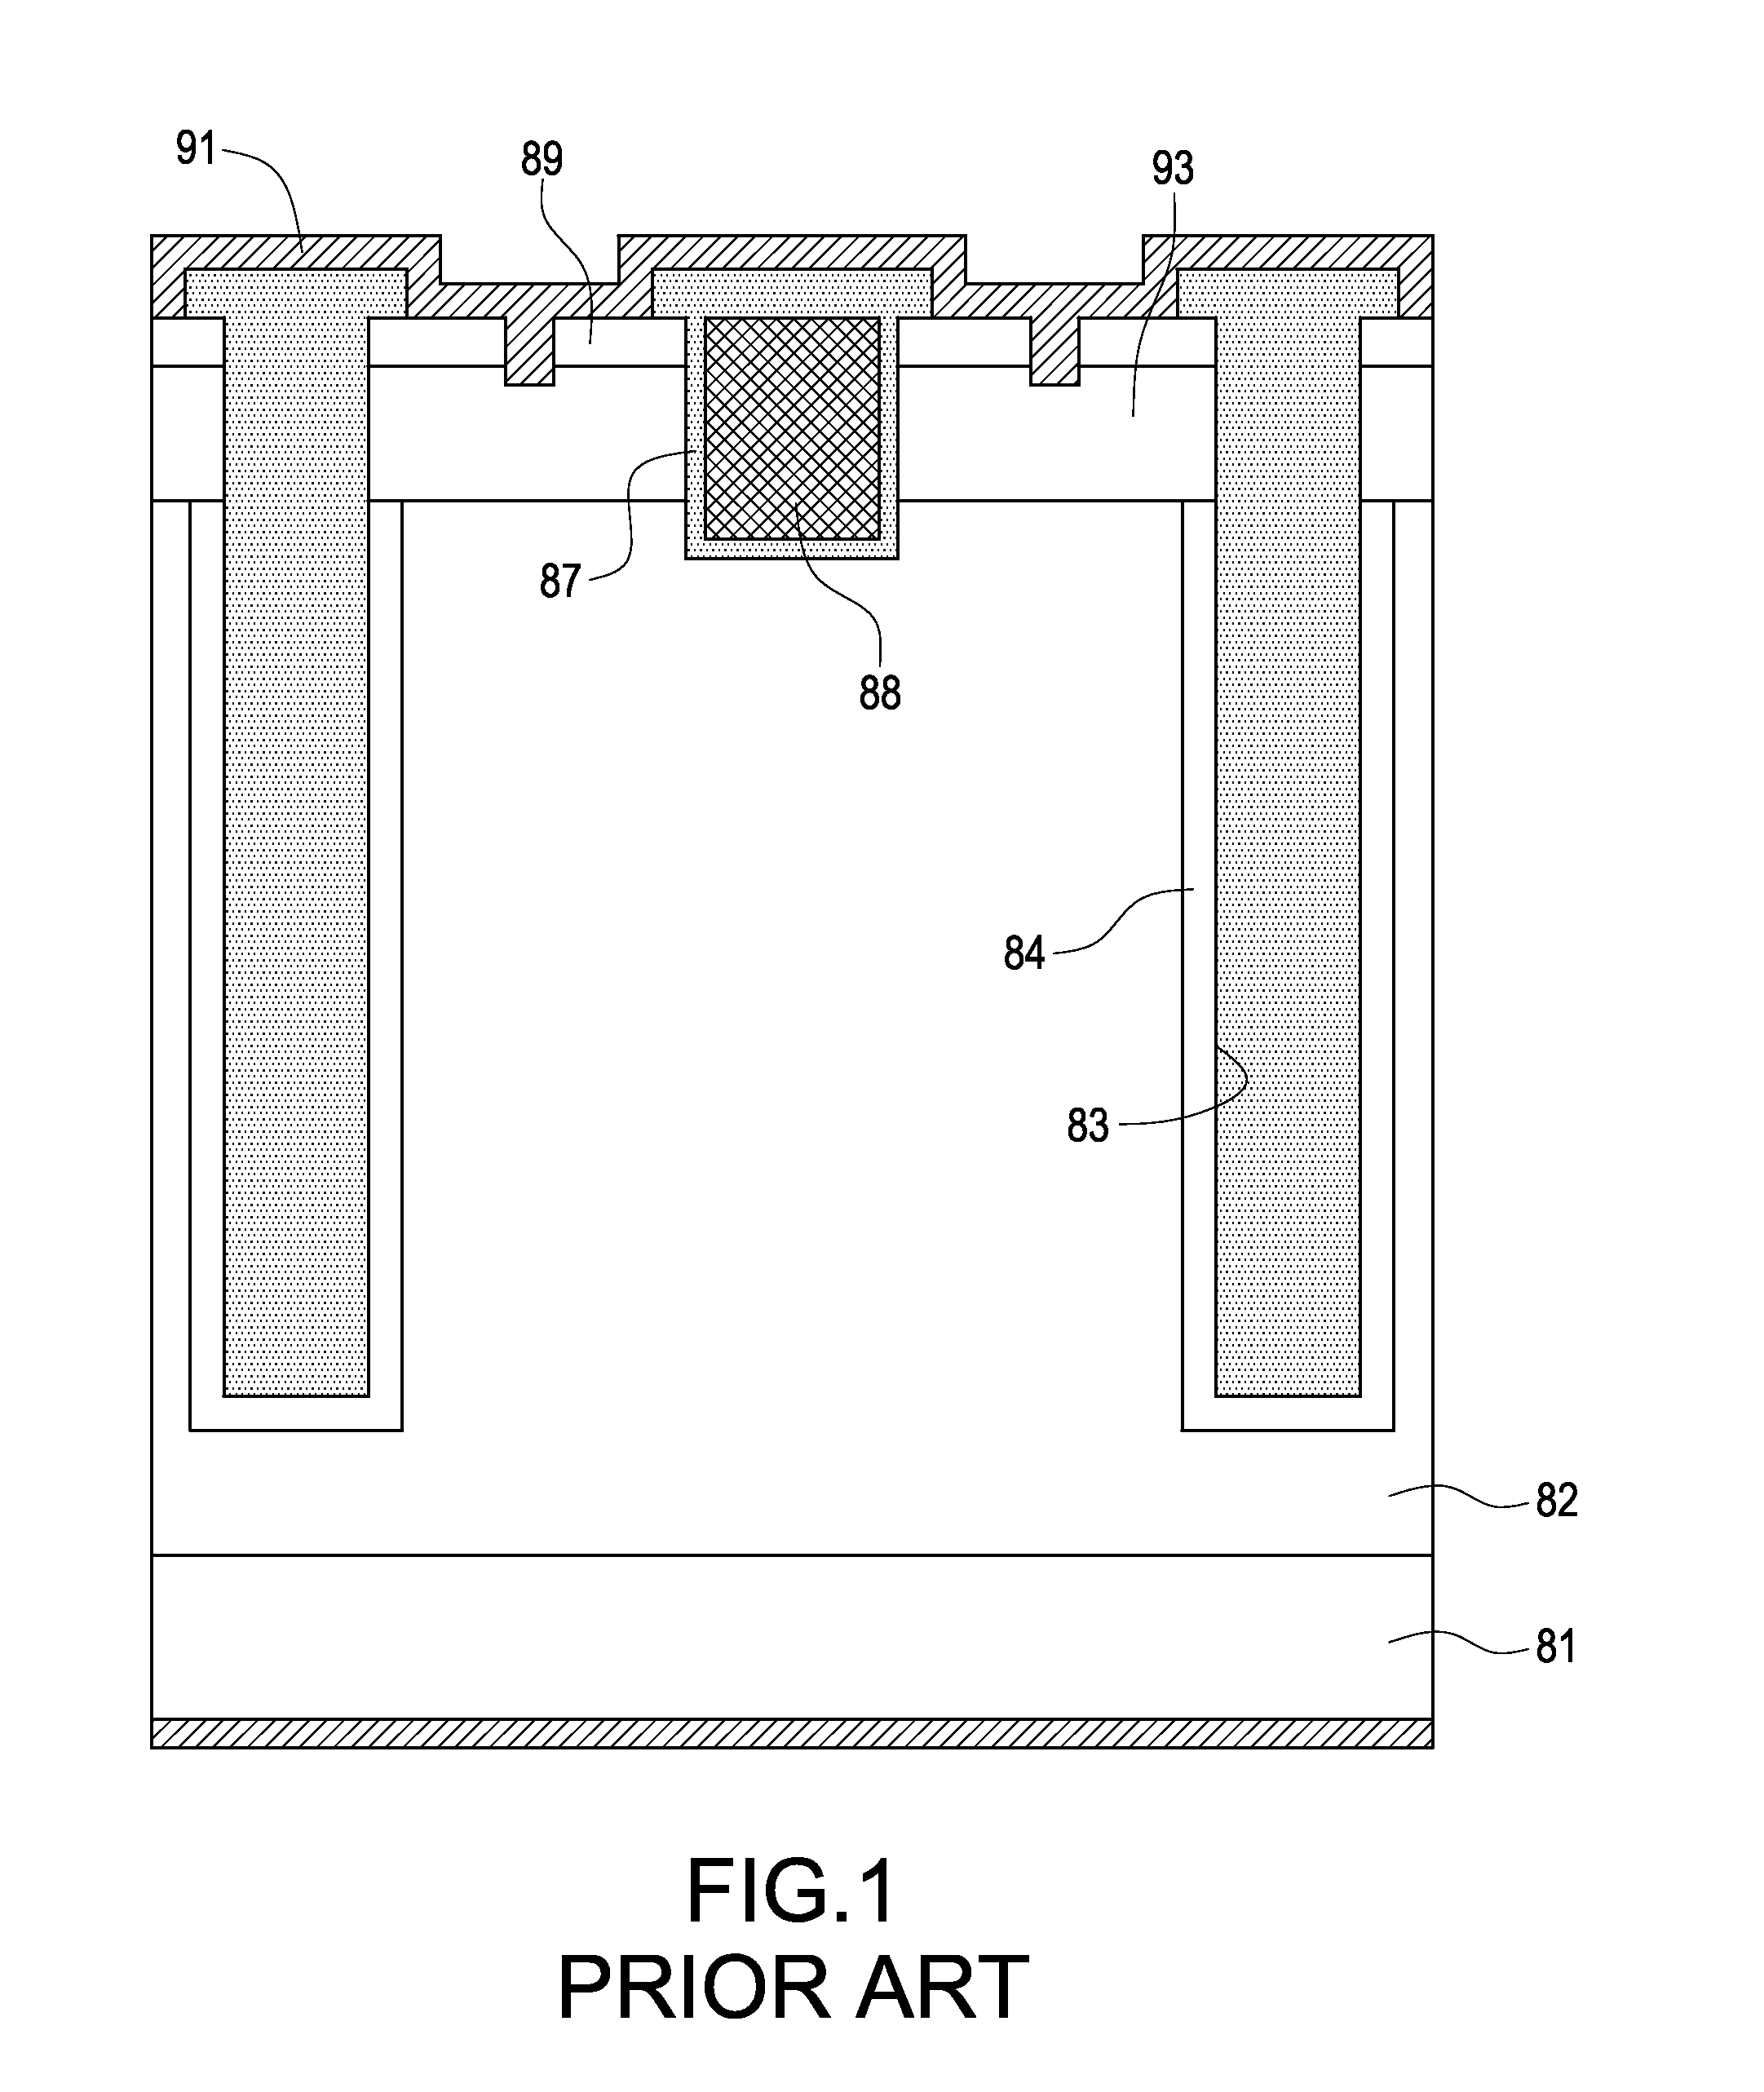 Super junction for semiconductor device and method for manufacturing the same